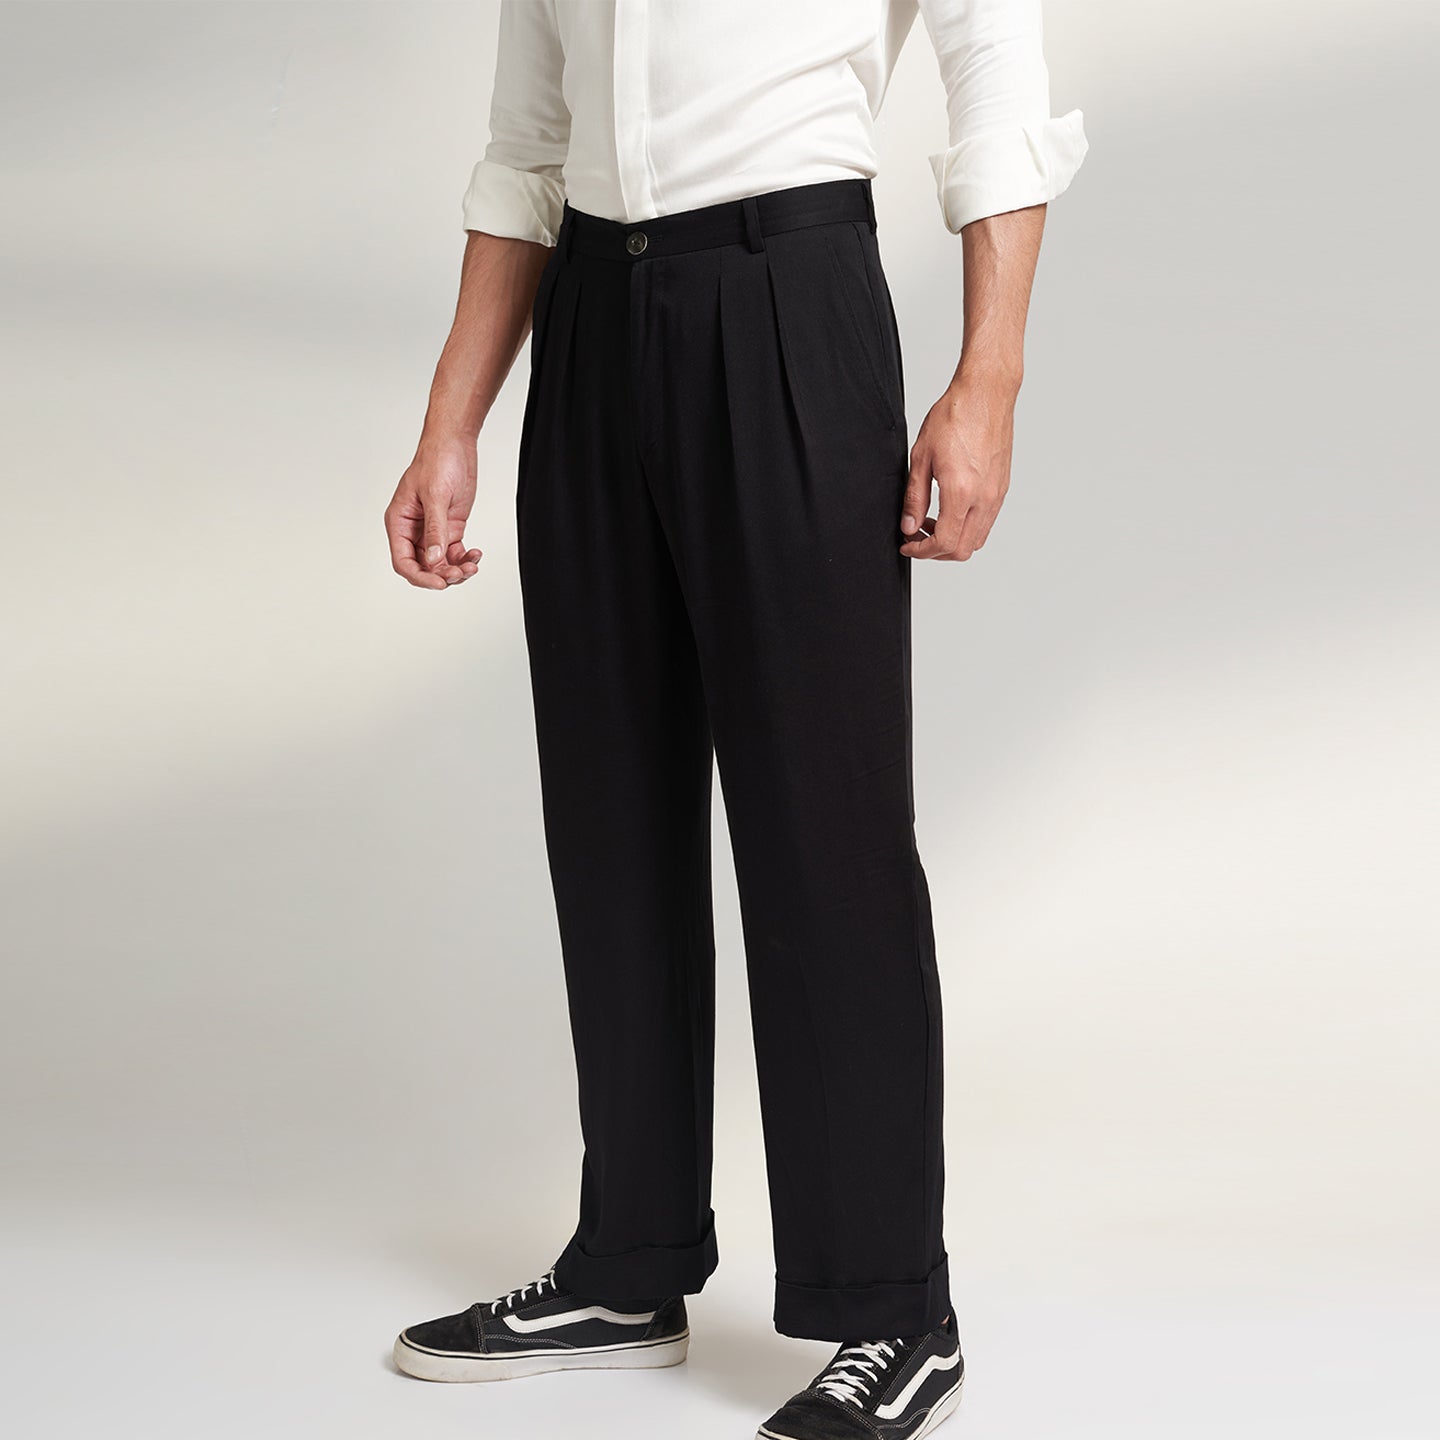 A global medium size model wearing BLACK ORGANIC LOTUS SILK FABRIC TROUSERS. the trouser has a straight comfort fit with turn up bottom and 2 front pleats from house of Parvi.